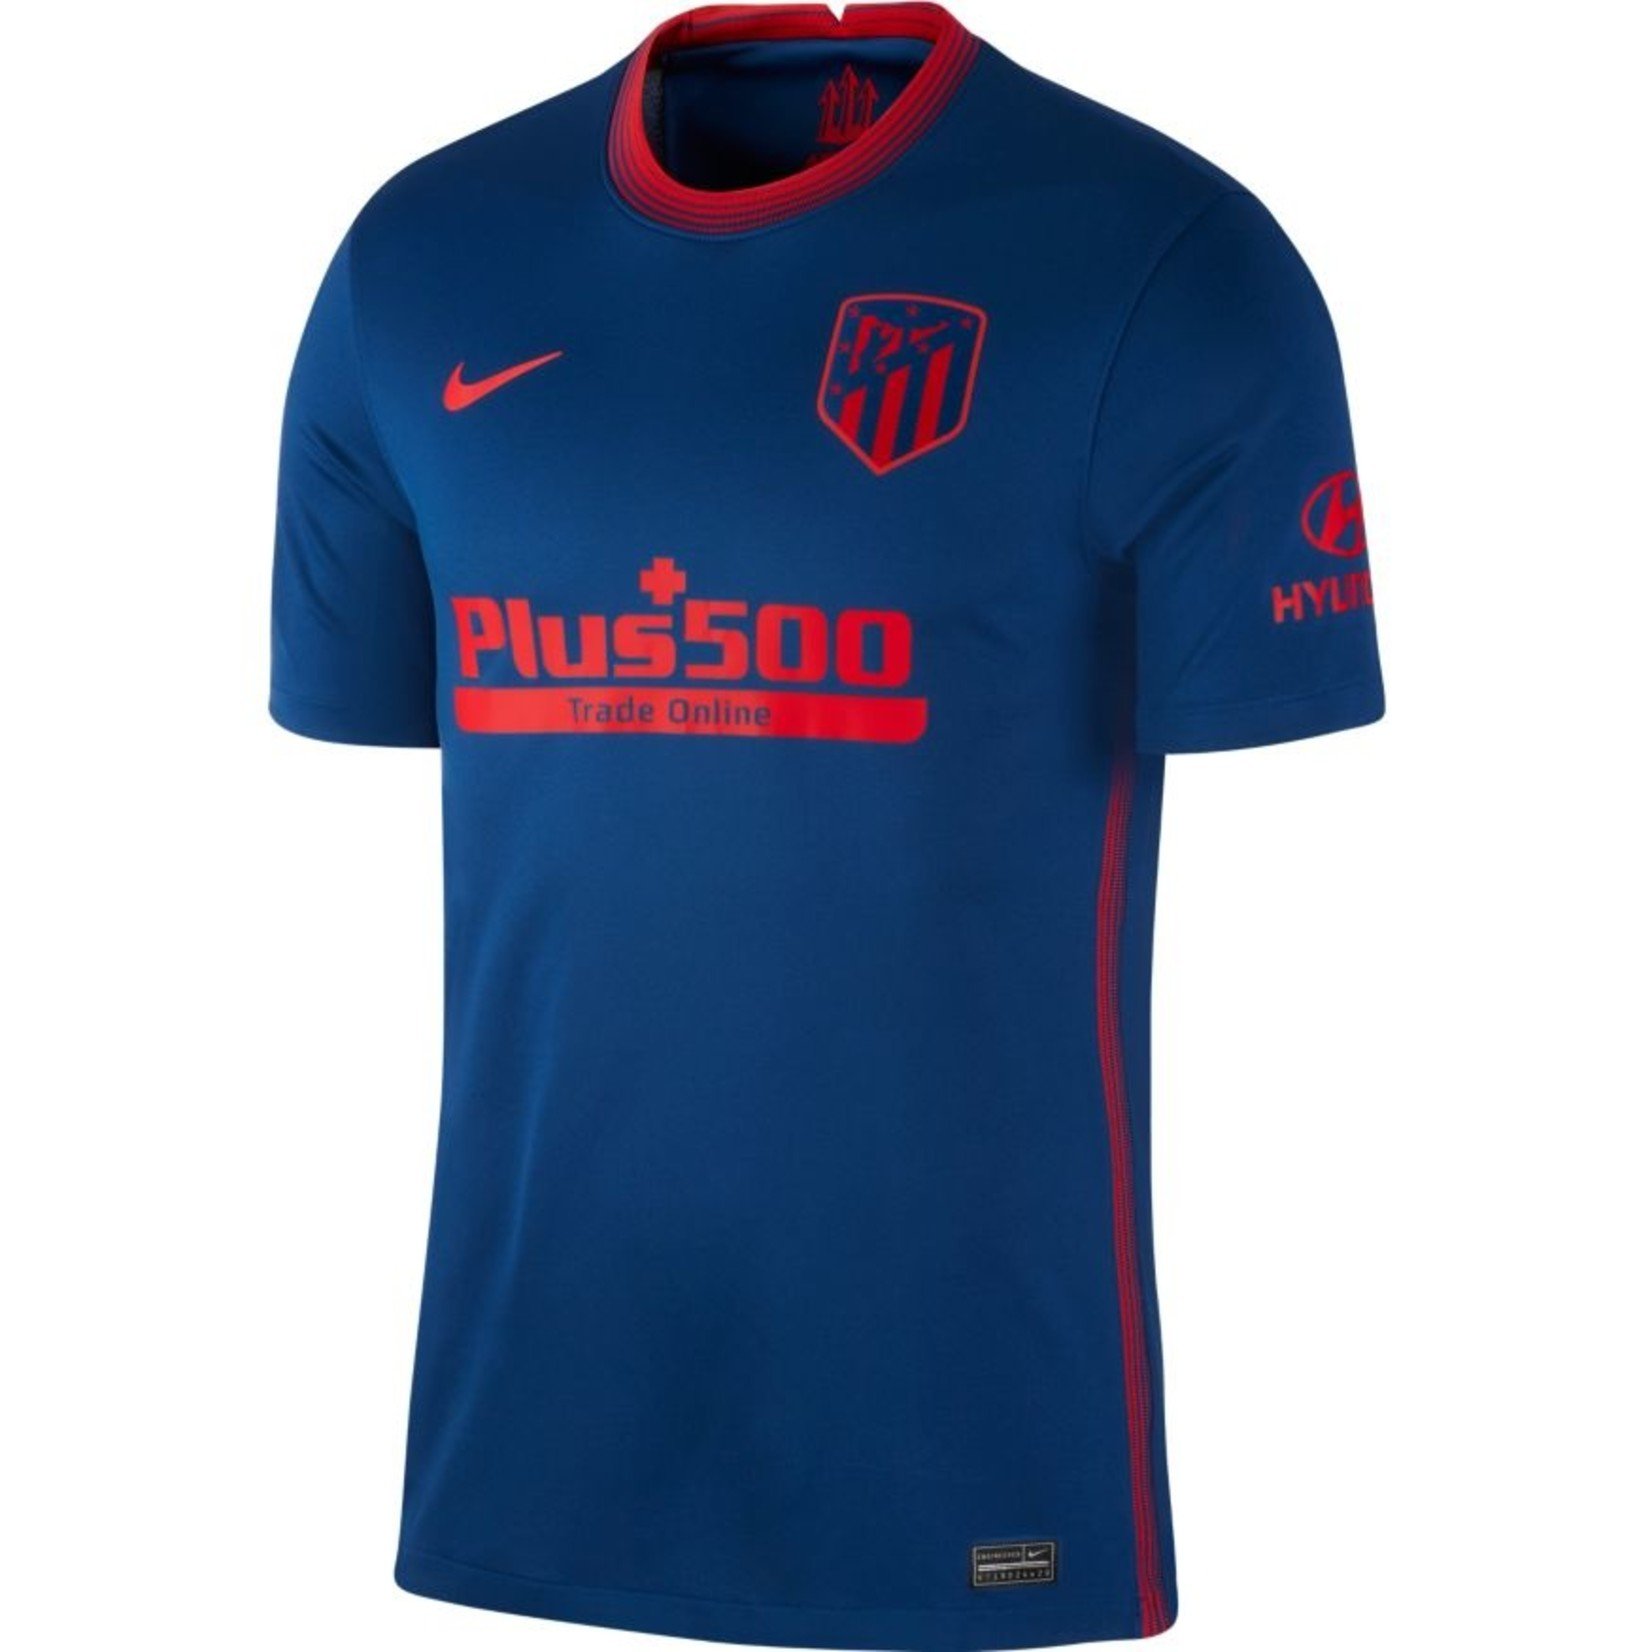 Nike Atletico Madrid 20/21 Away Jersey Adult XL